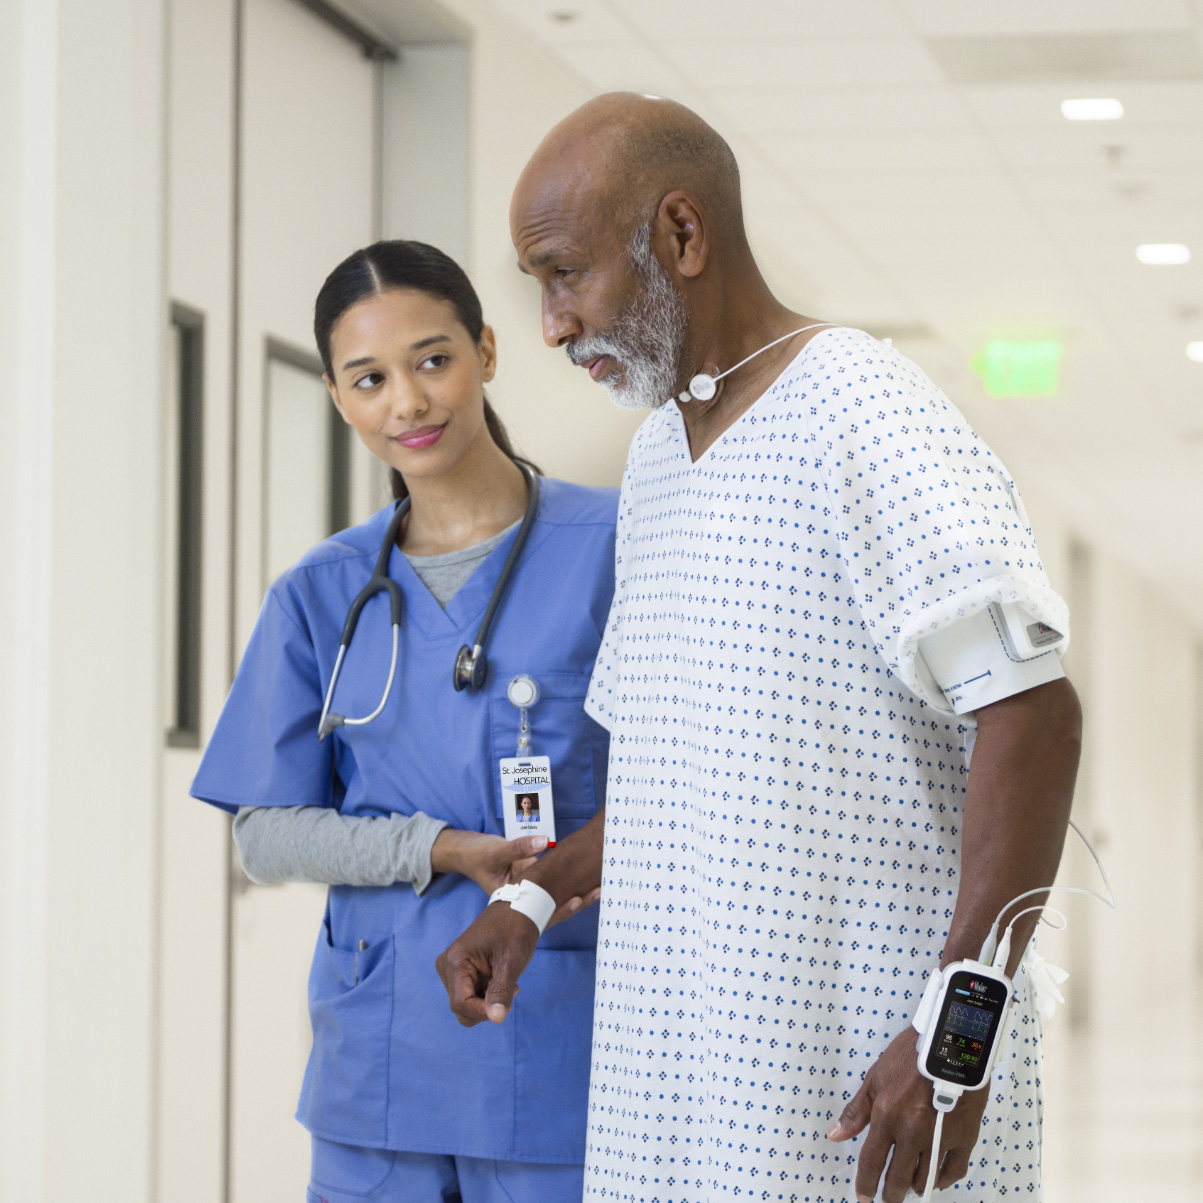 Dark-skinned patient being helped by nurse in scrubs walking down the hall in hospital gown wearing a Masimo Radius VSM monitor. 